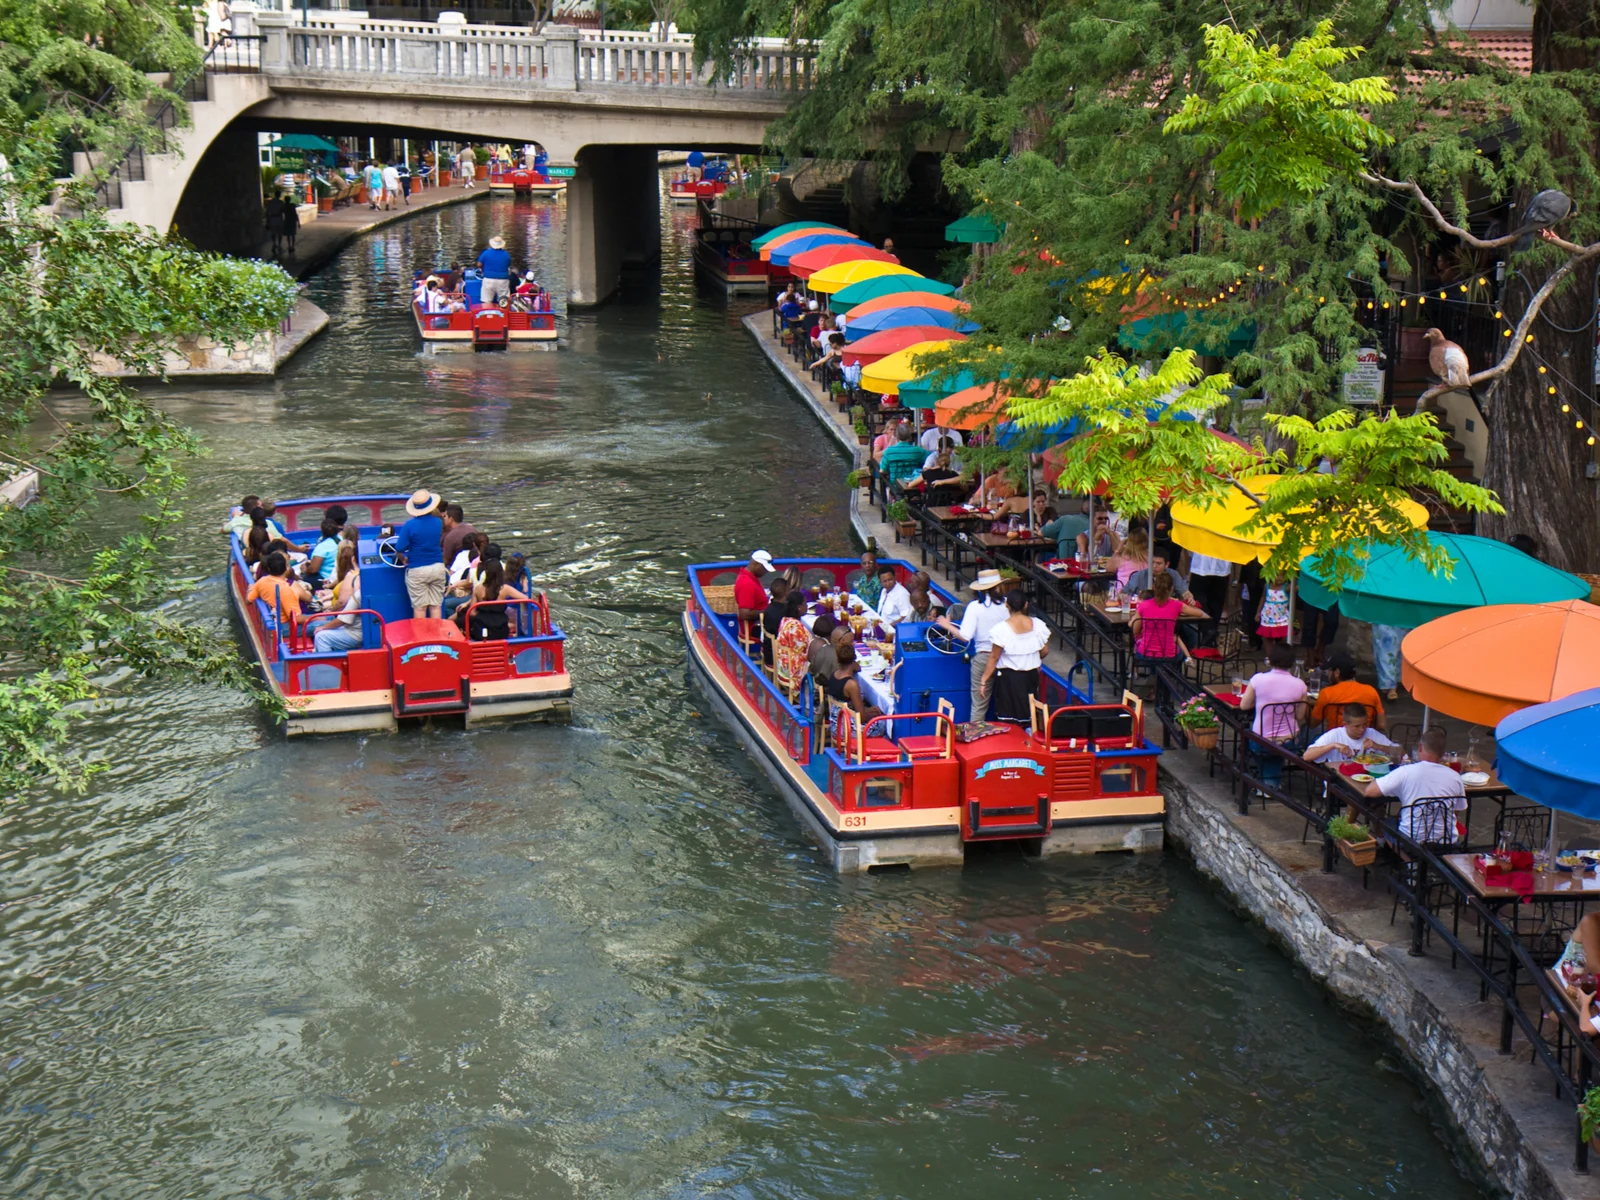 Riding boats on the San Antonio River, one of the best things to do in San Antonio